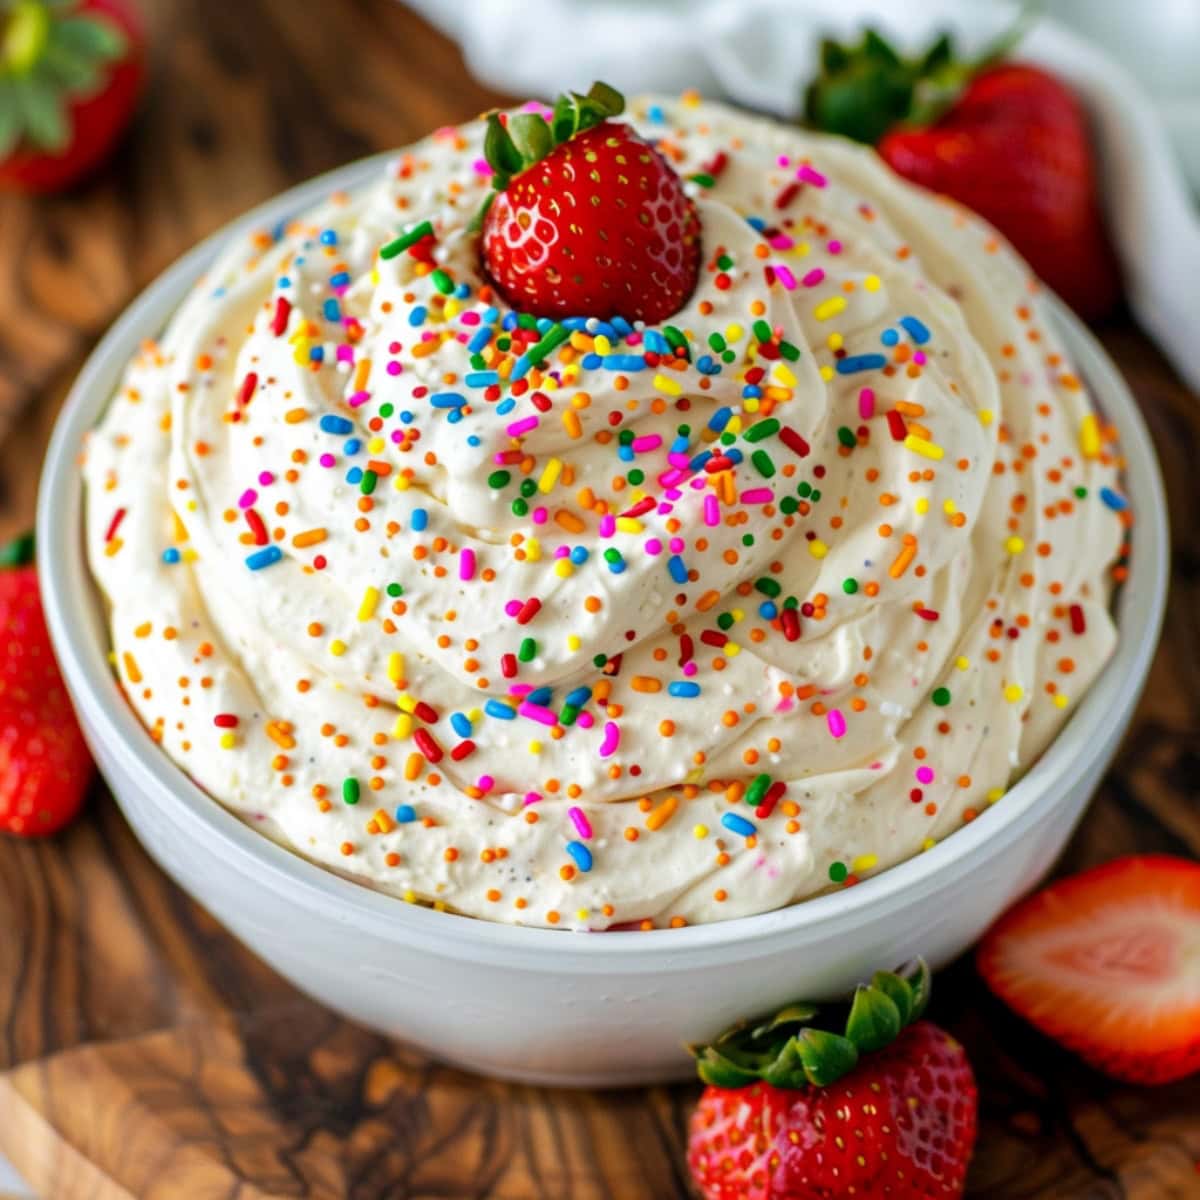 Colorful funfetti cake dip, topped with rainbow sprinkles and a strawberry.